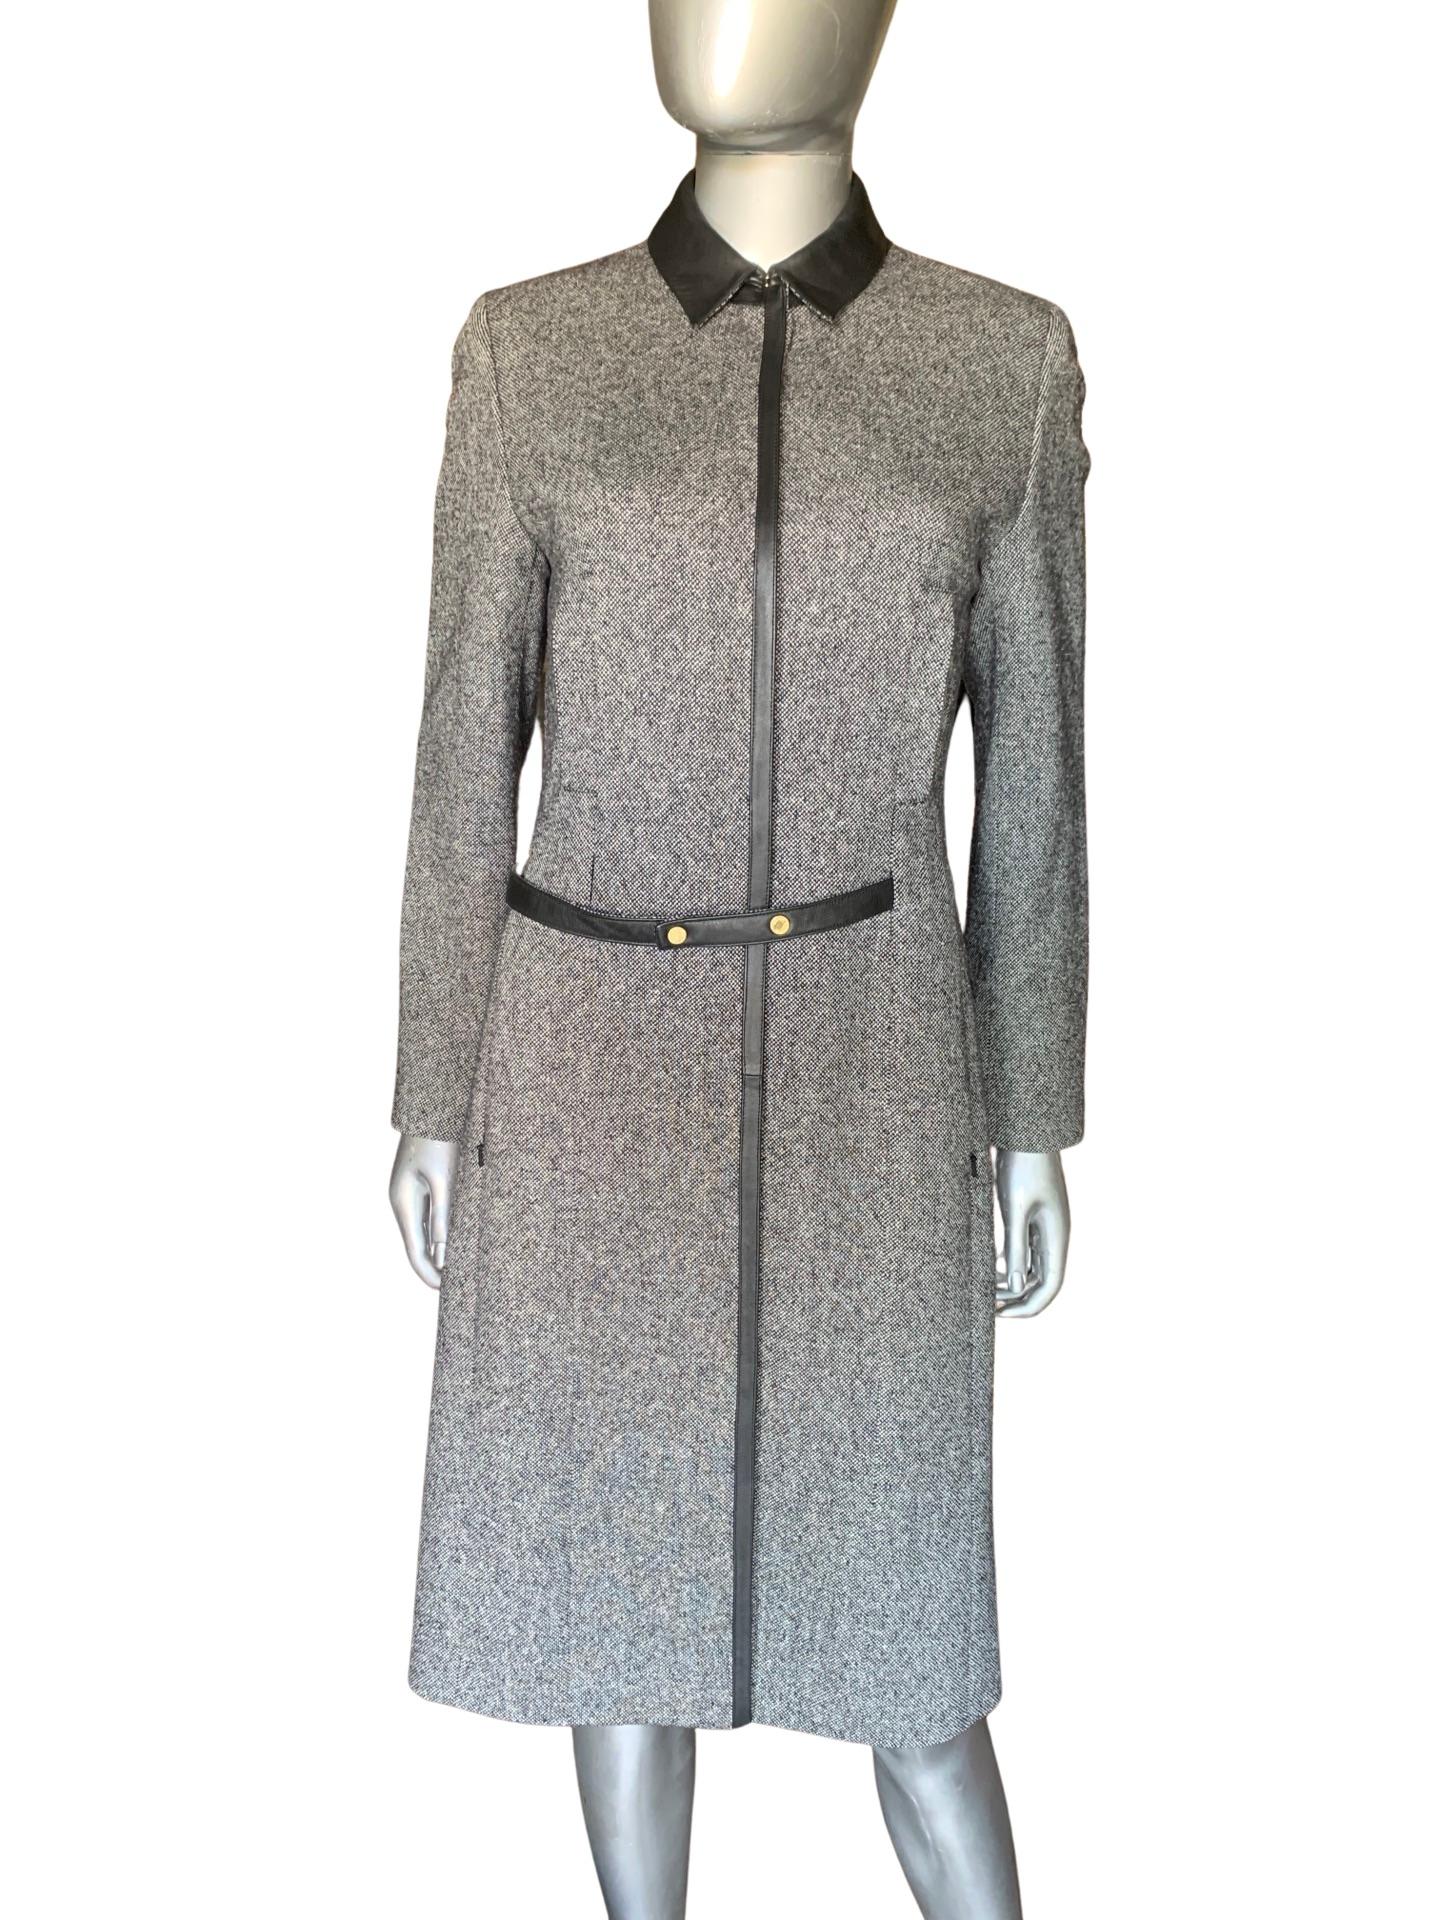 Women's Worth New York Millitary Silk/Wool Coat Dress with Black Leather Trim Size 4 For Sale